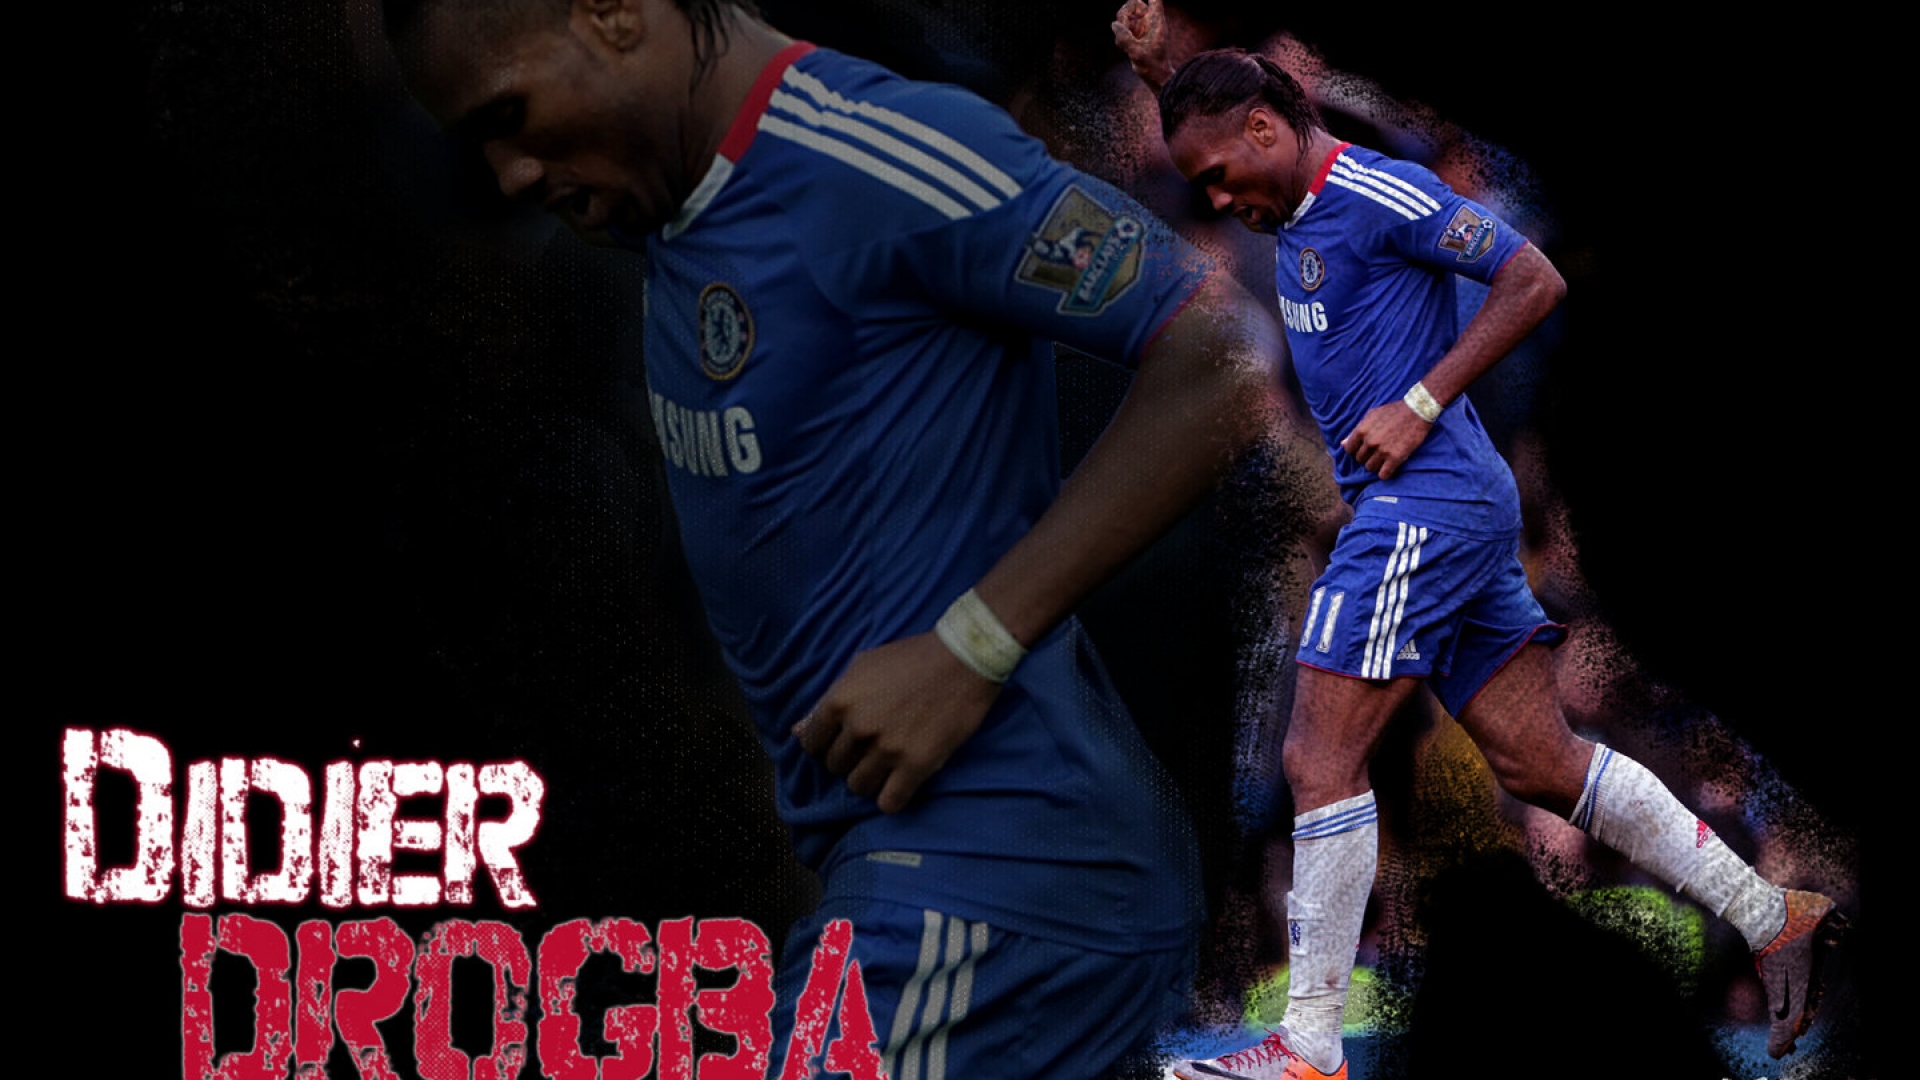 chelsea wallpaper,football player,player,product,games,team